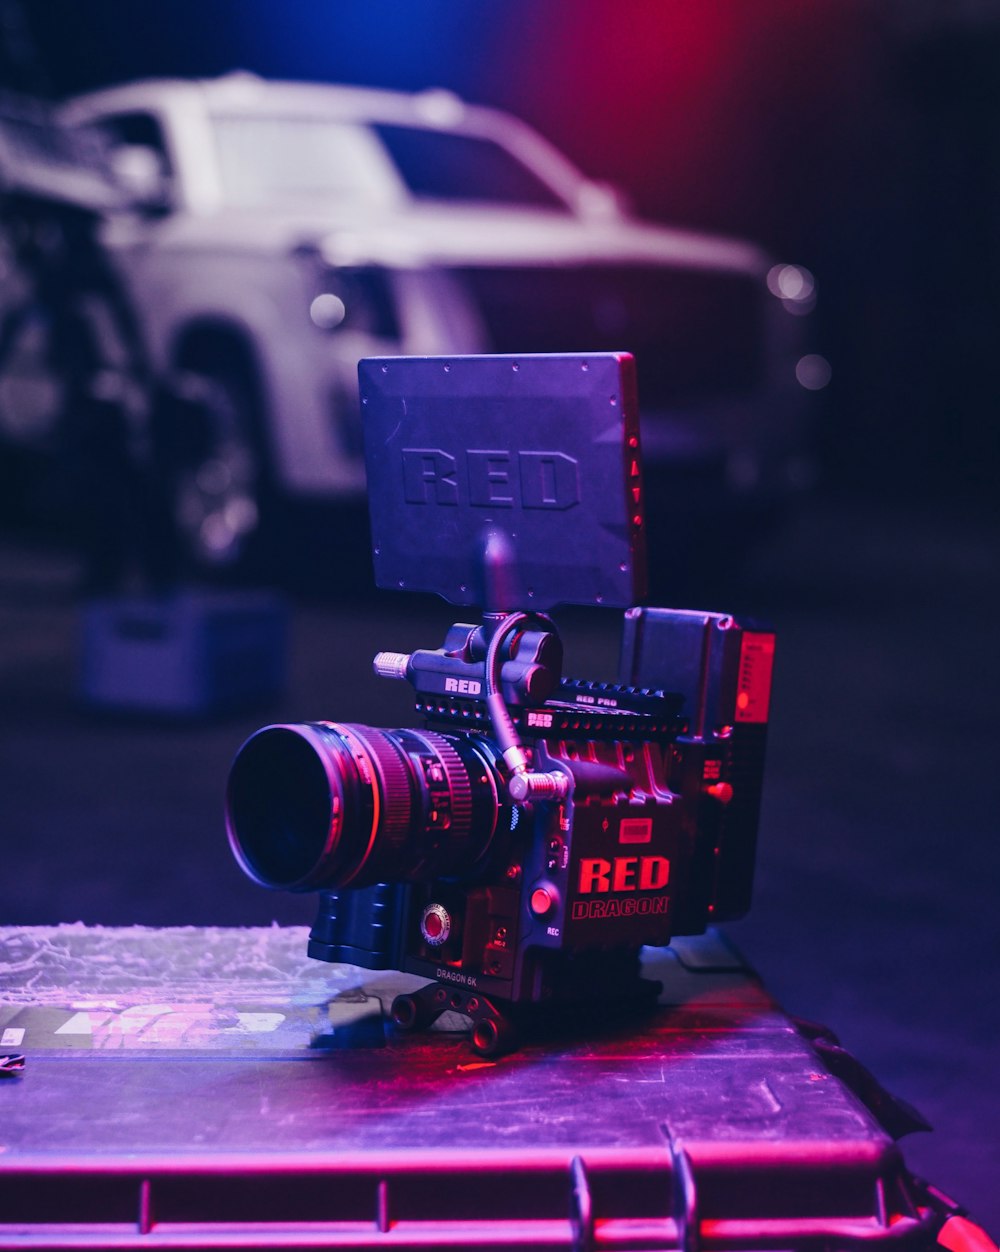 black camera with RED case